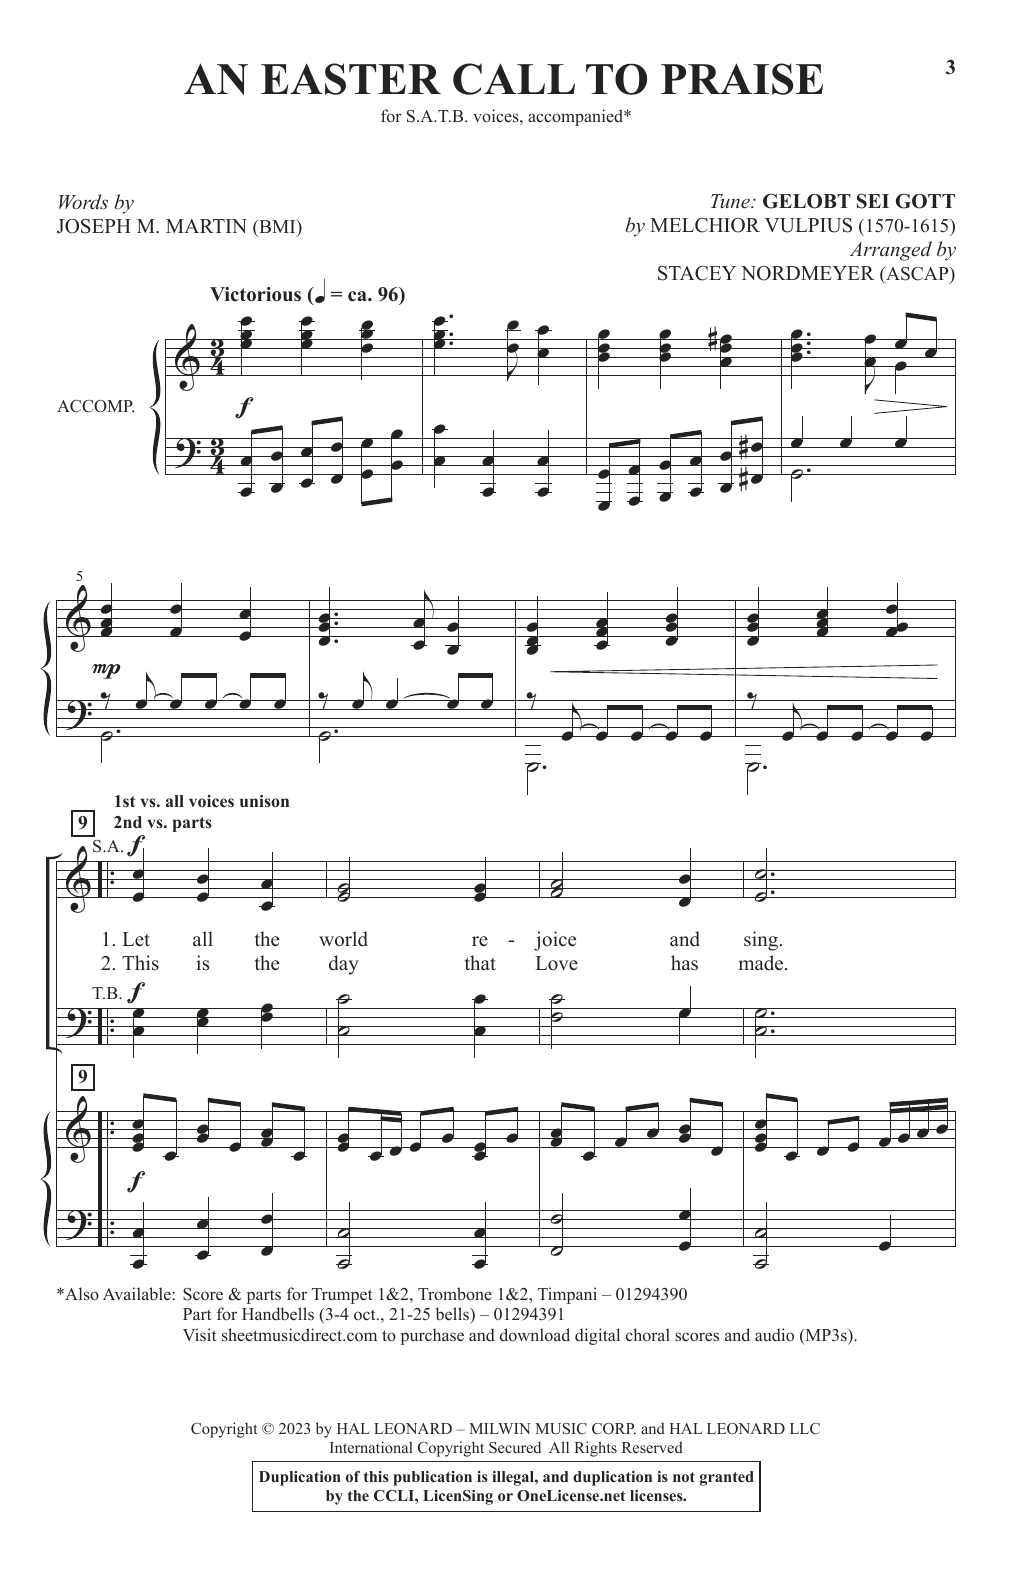 Joseph M. Martin An Easter Call To Praise (arr. Stacey Nordmeyer) sheet music notes printable PDF score